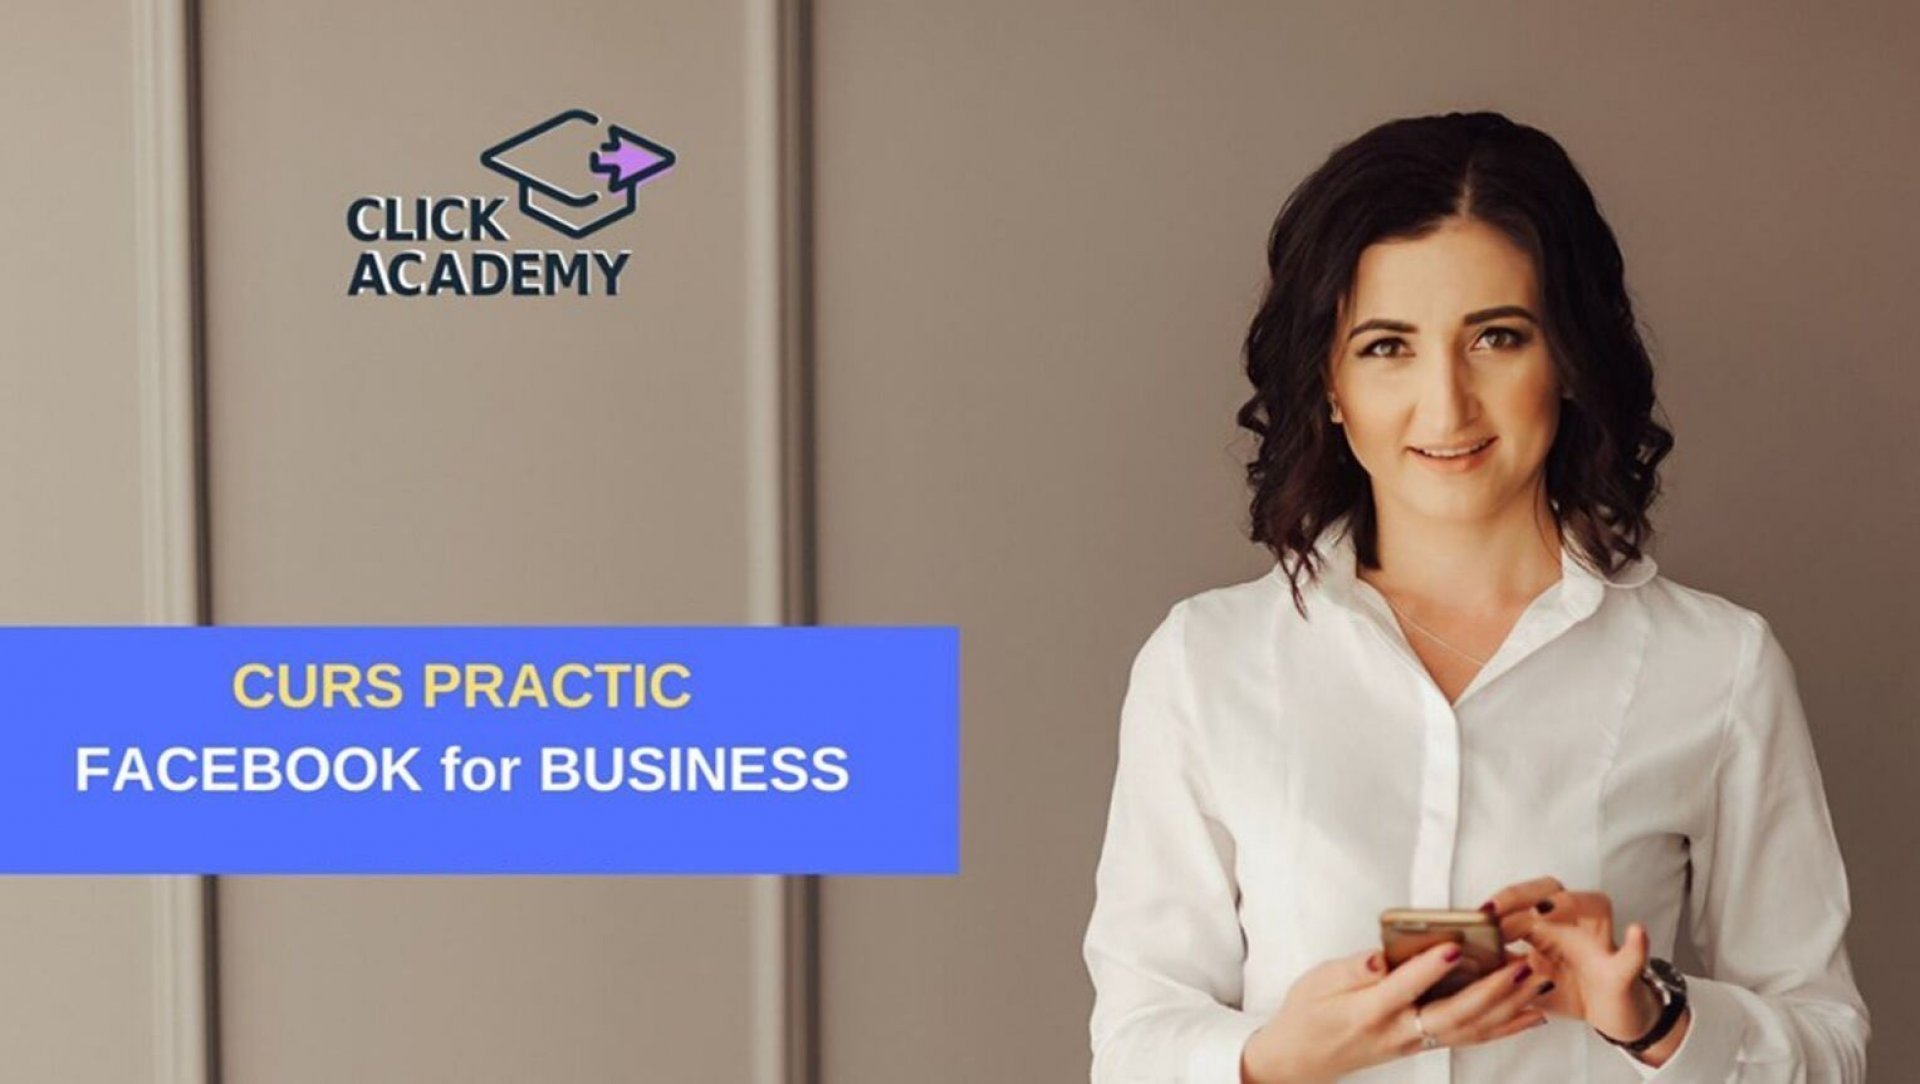 Curs practic - Facebook for Business 2.0 